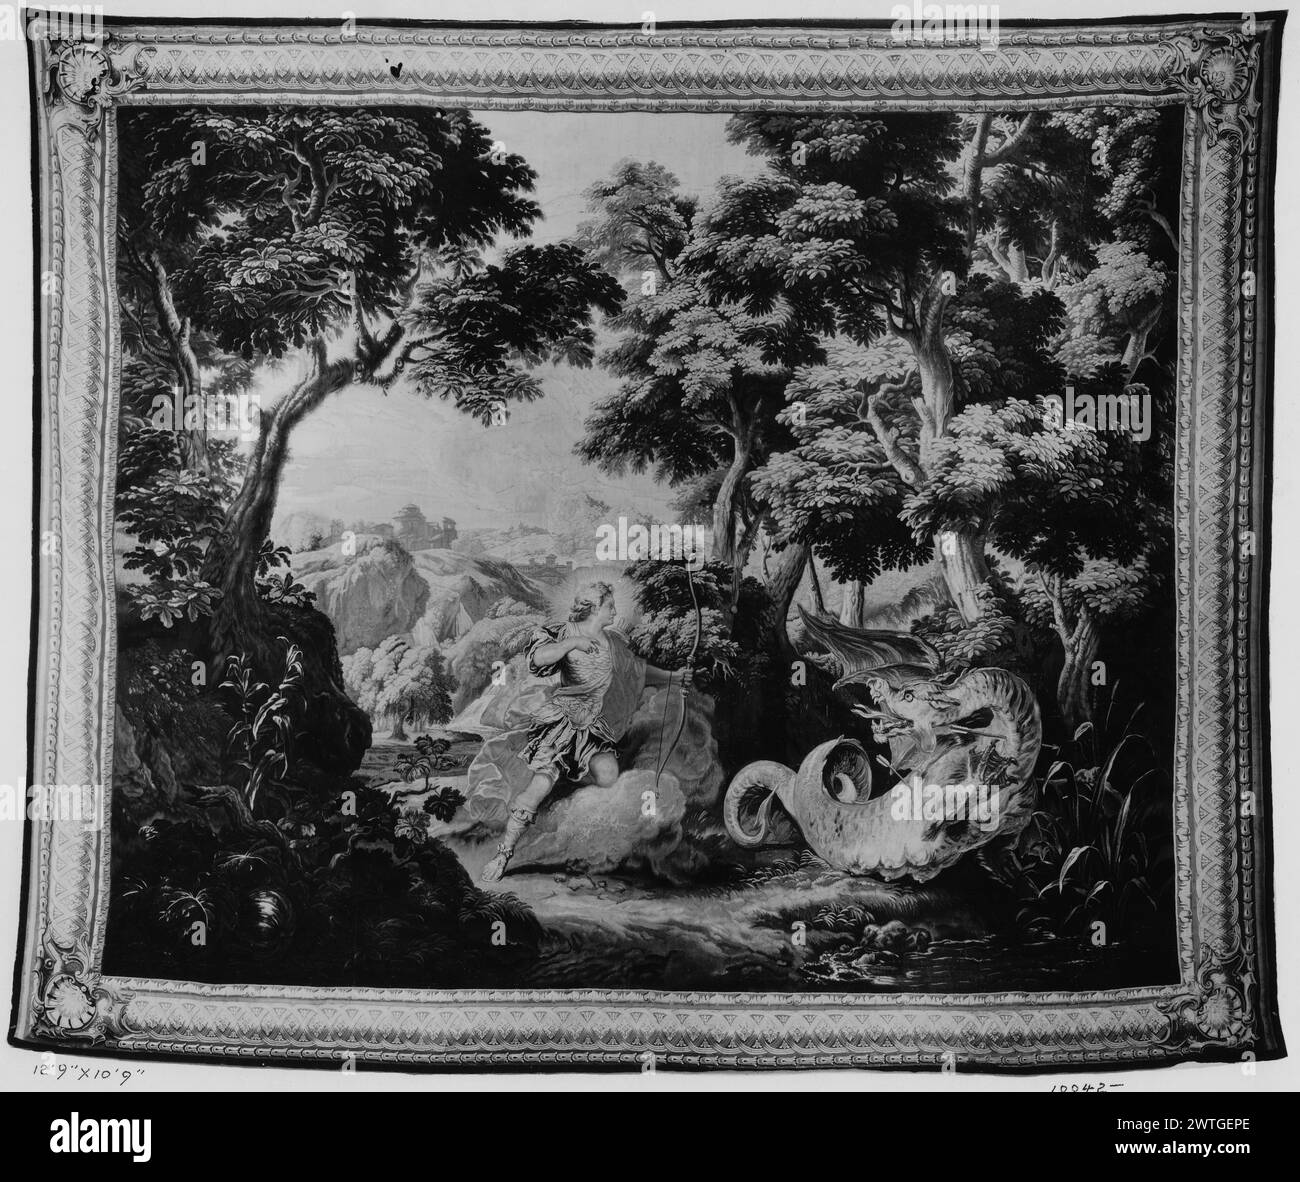 Apollo and the dragon Python. Bertin, Nicolas (French, 1668-1736) (author of design & cartoon creator, figures) [painter] Bonnart, Robert (French, 1652-aft.1729) (cartoon creator, landscape) [painter] c. 1704-1720 Tapestry Dimensions: H 10'10' x W 12'7' Tapestry Materials/Techniques: wool & silk Culture: French Weaving Center: Paris Ownership History: French & Co.?. Gift of Mrs. Matthias Plum. United States, Ohio, Cleveland, Cleveland Museum of Art, accno. 56-327. Apollo shoots Python with bow & arrows in wooded landscape (BRD) picture-frame border with interlaced rosetted strapwork, shell car Stock Photo